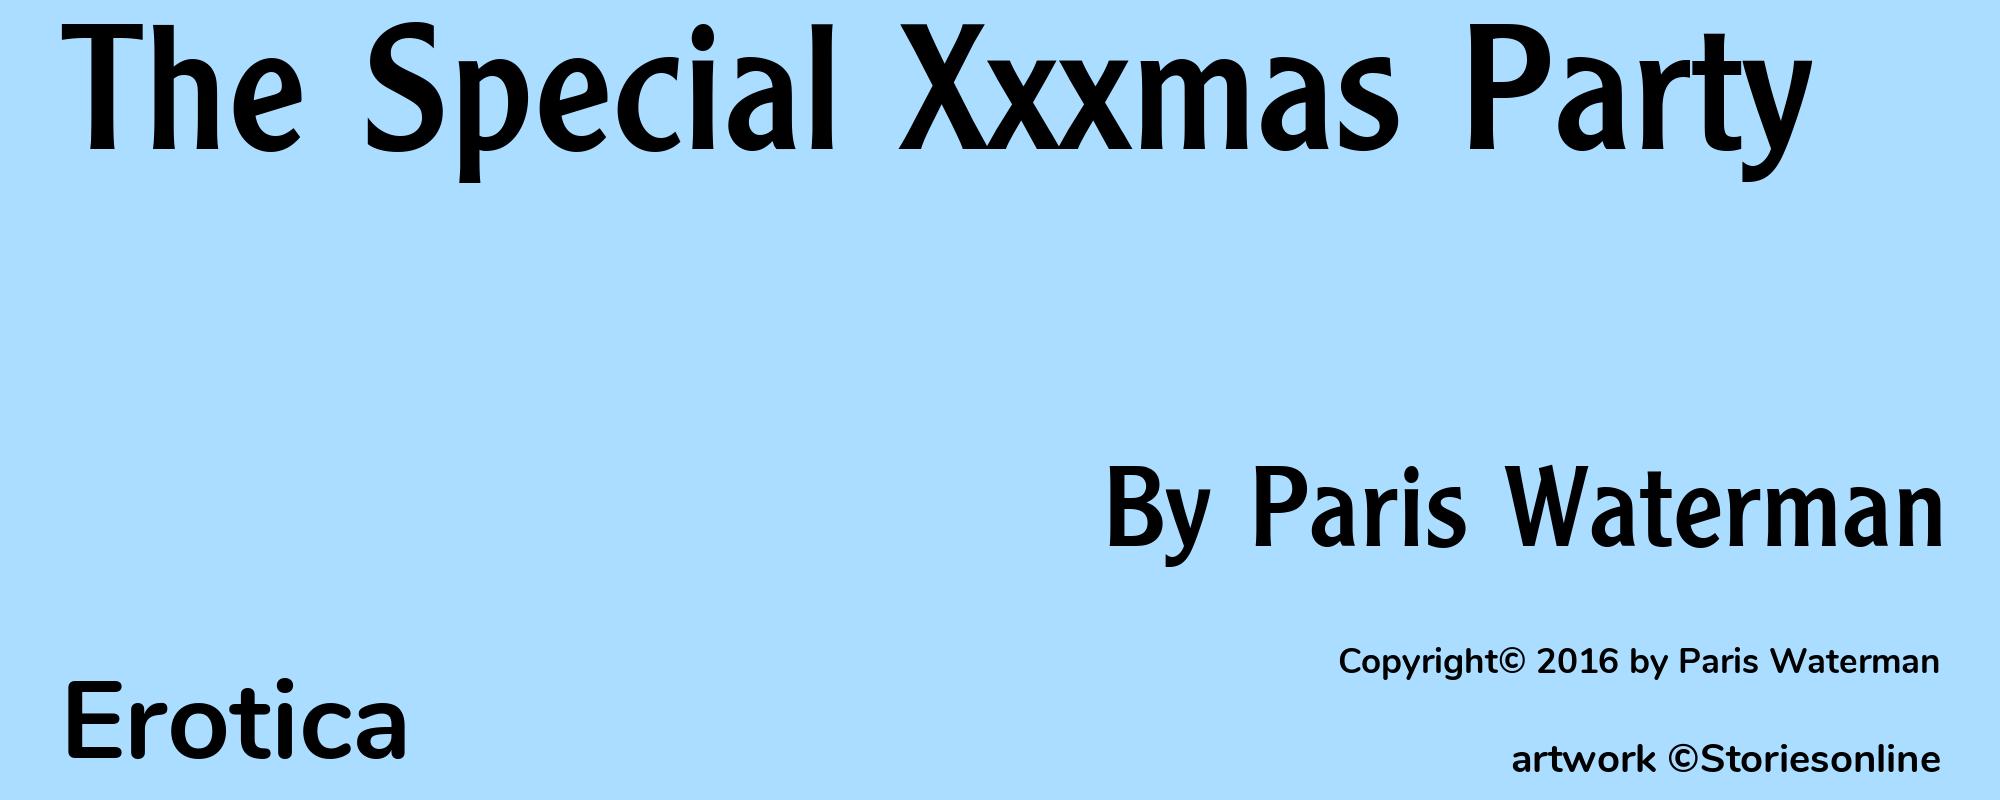 The Special Xxxmas Party - Cover